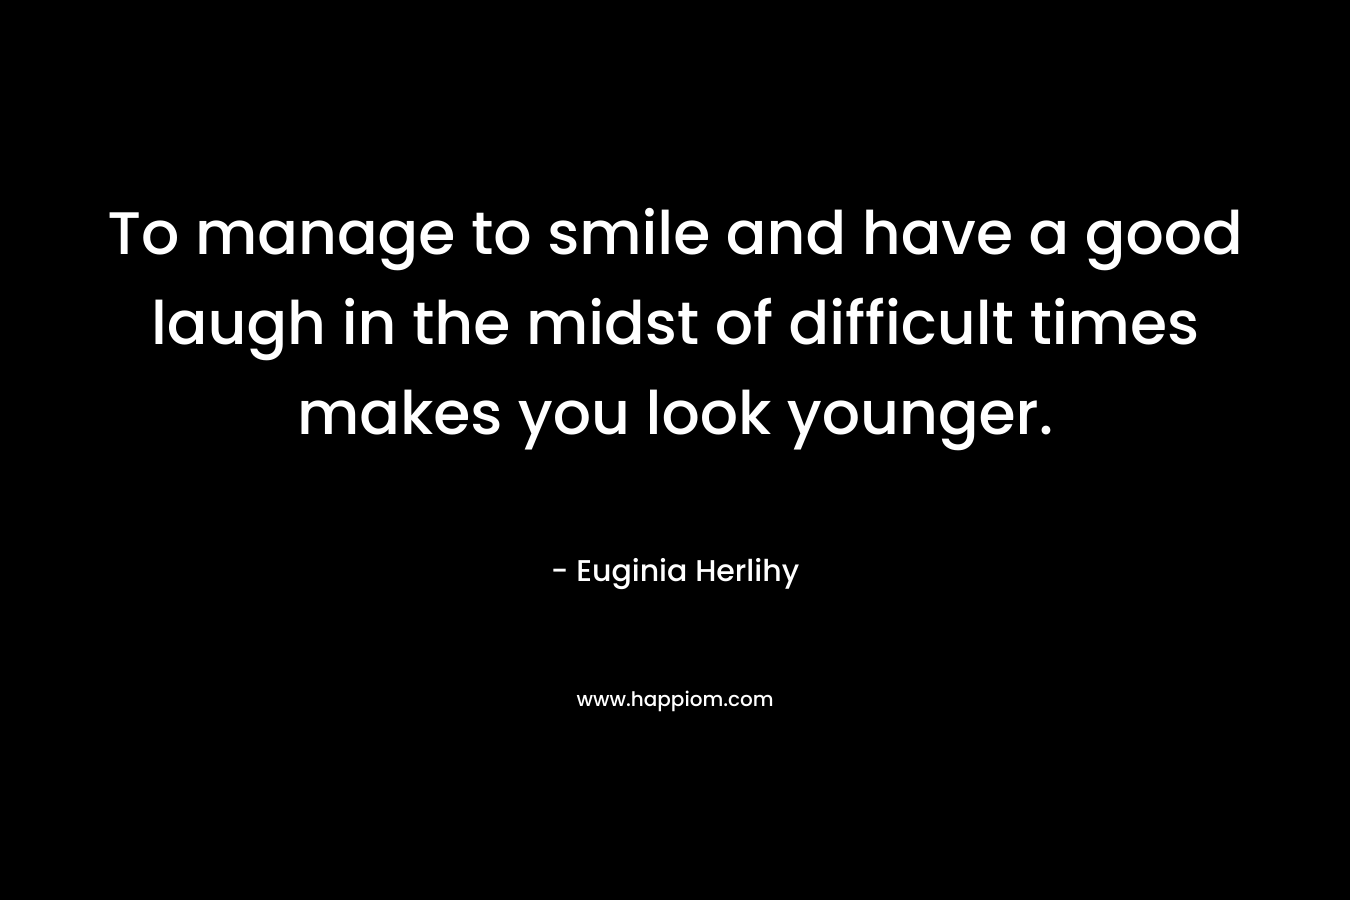 To manage to smile and have a good laugh in the midst of difficult times makes you look younger. – Euginia Herlihy